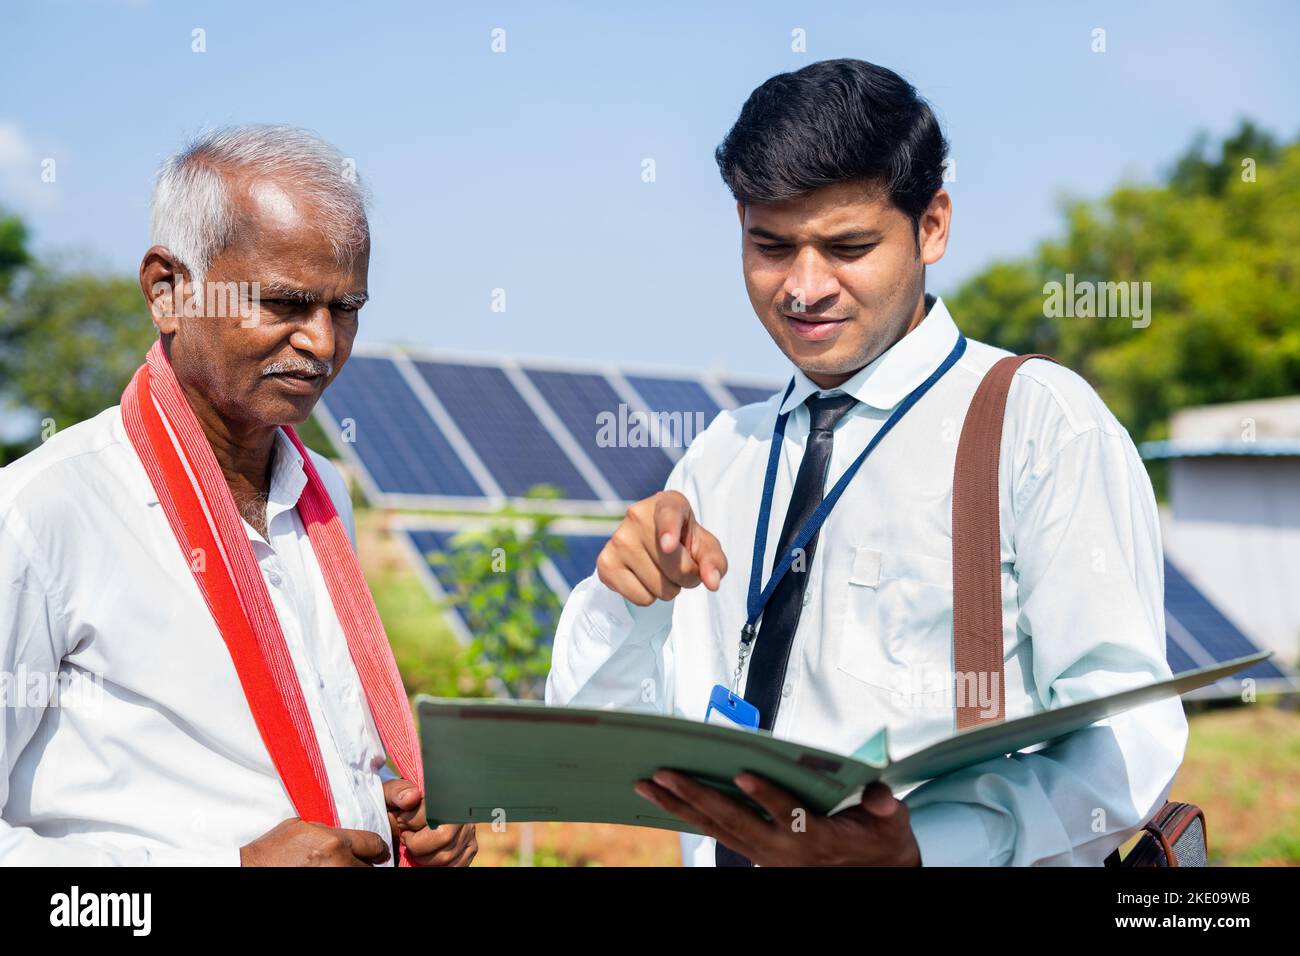 focus on farmer executive or officer checking on loan documents from village farmer in front of solar panel - concept of financial, banking support Stock Photo